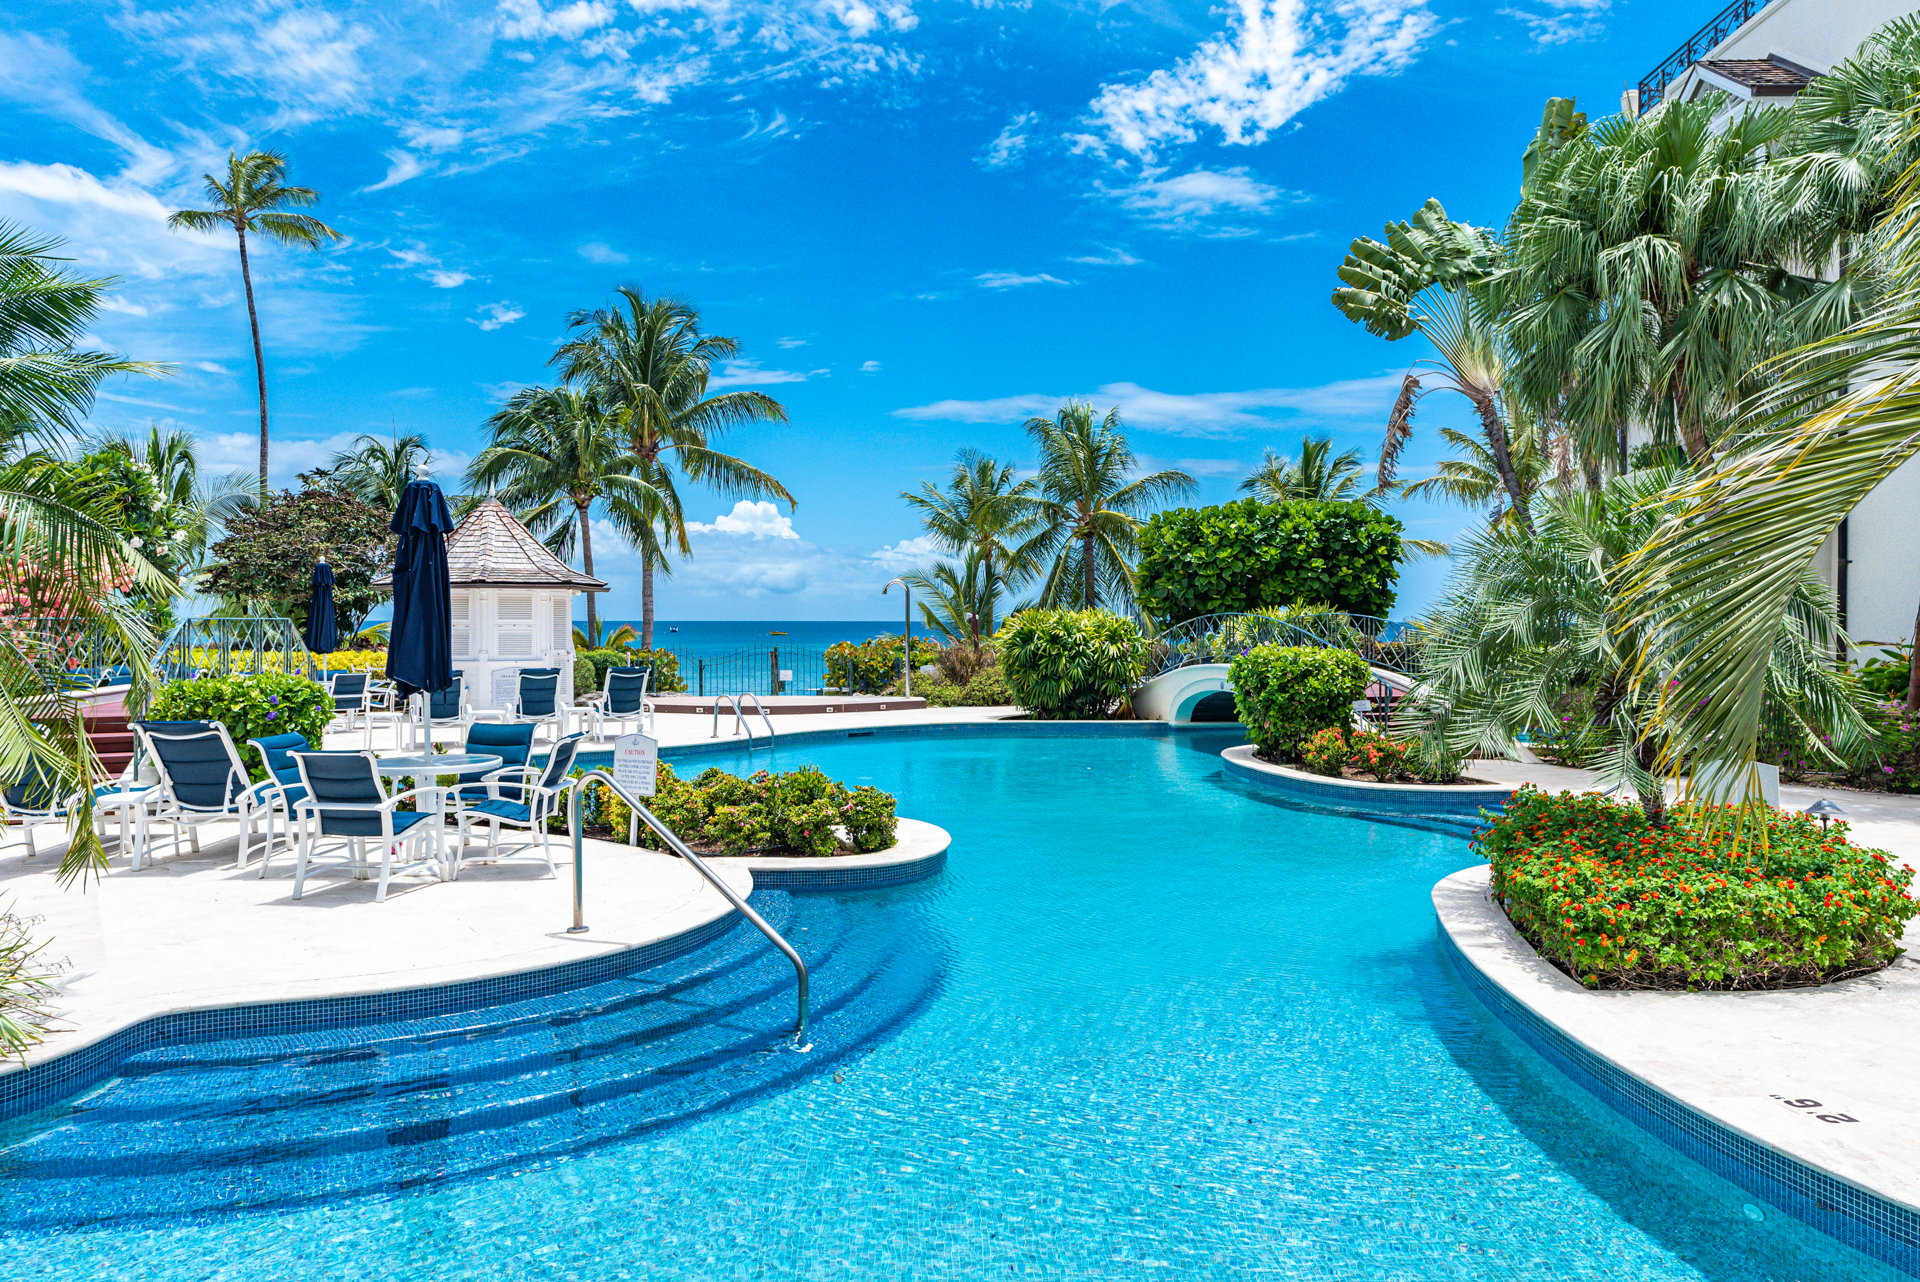 A large turquoise swimming pool in front of the ocean in Barbados